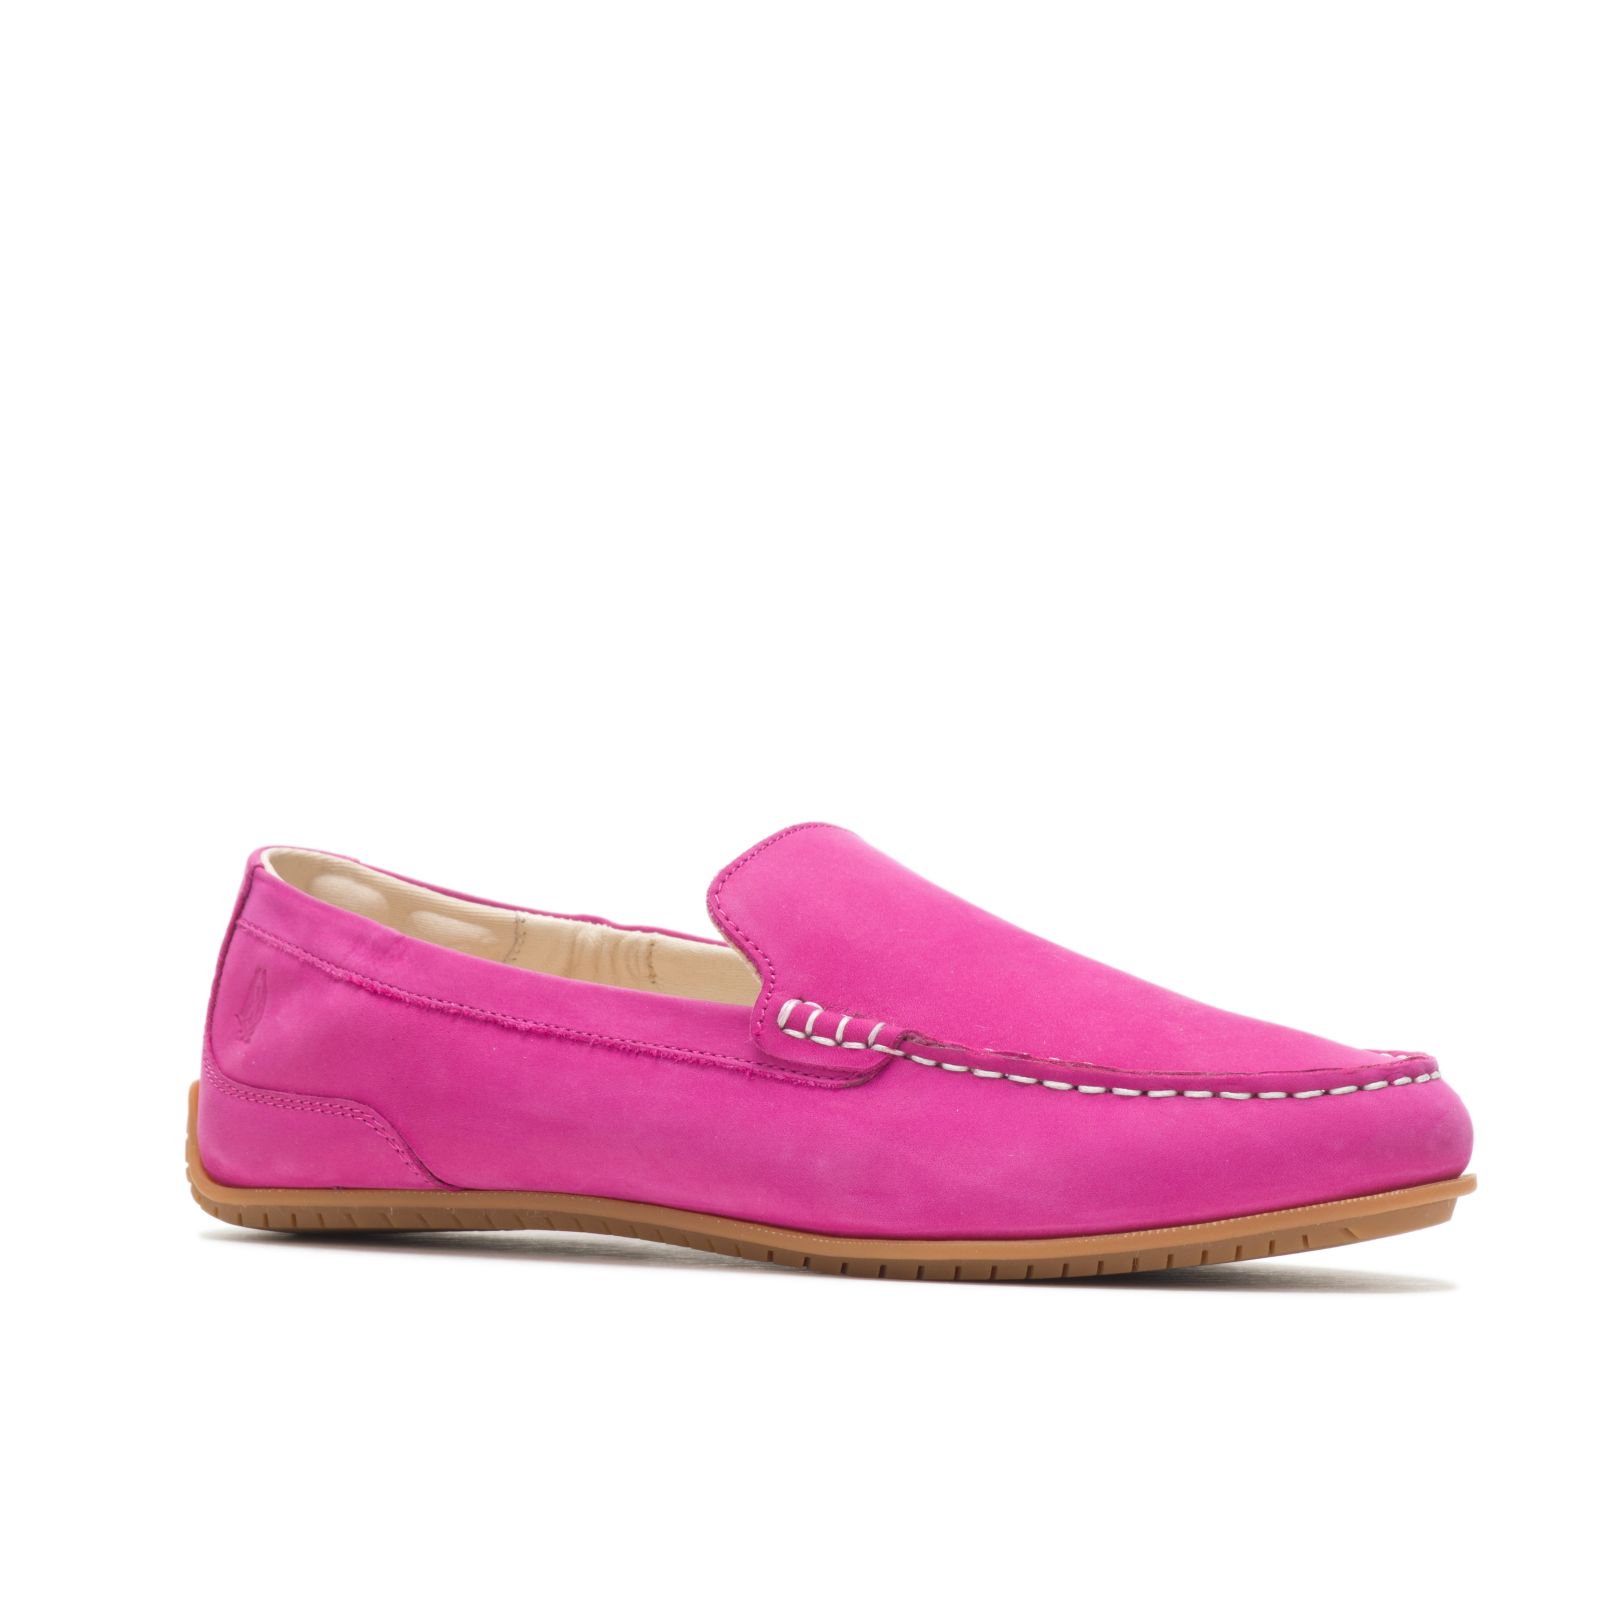 Loafers Hush Puppies Cora Mujer Very Berry Nubuck | LOZHCRM-29